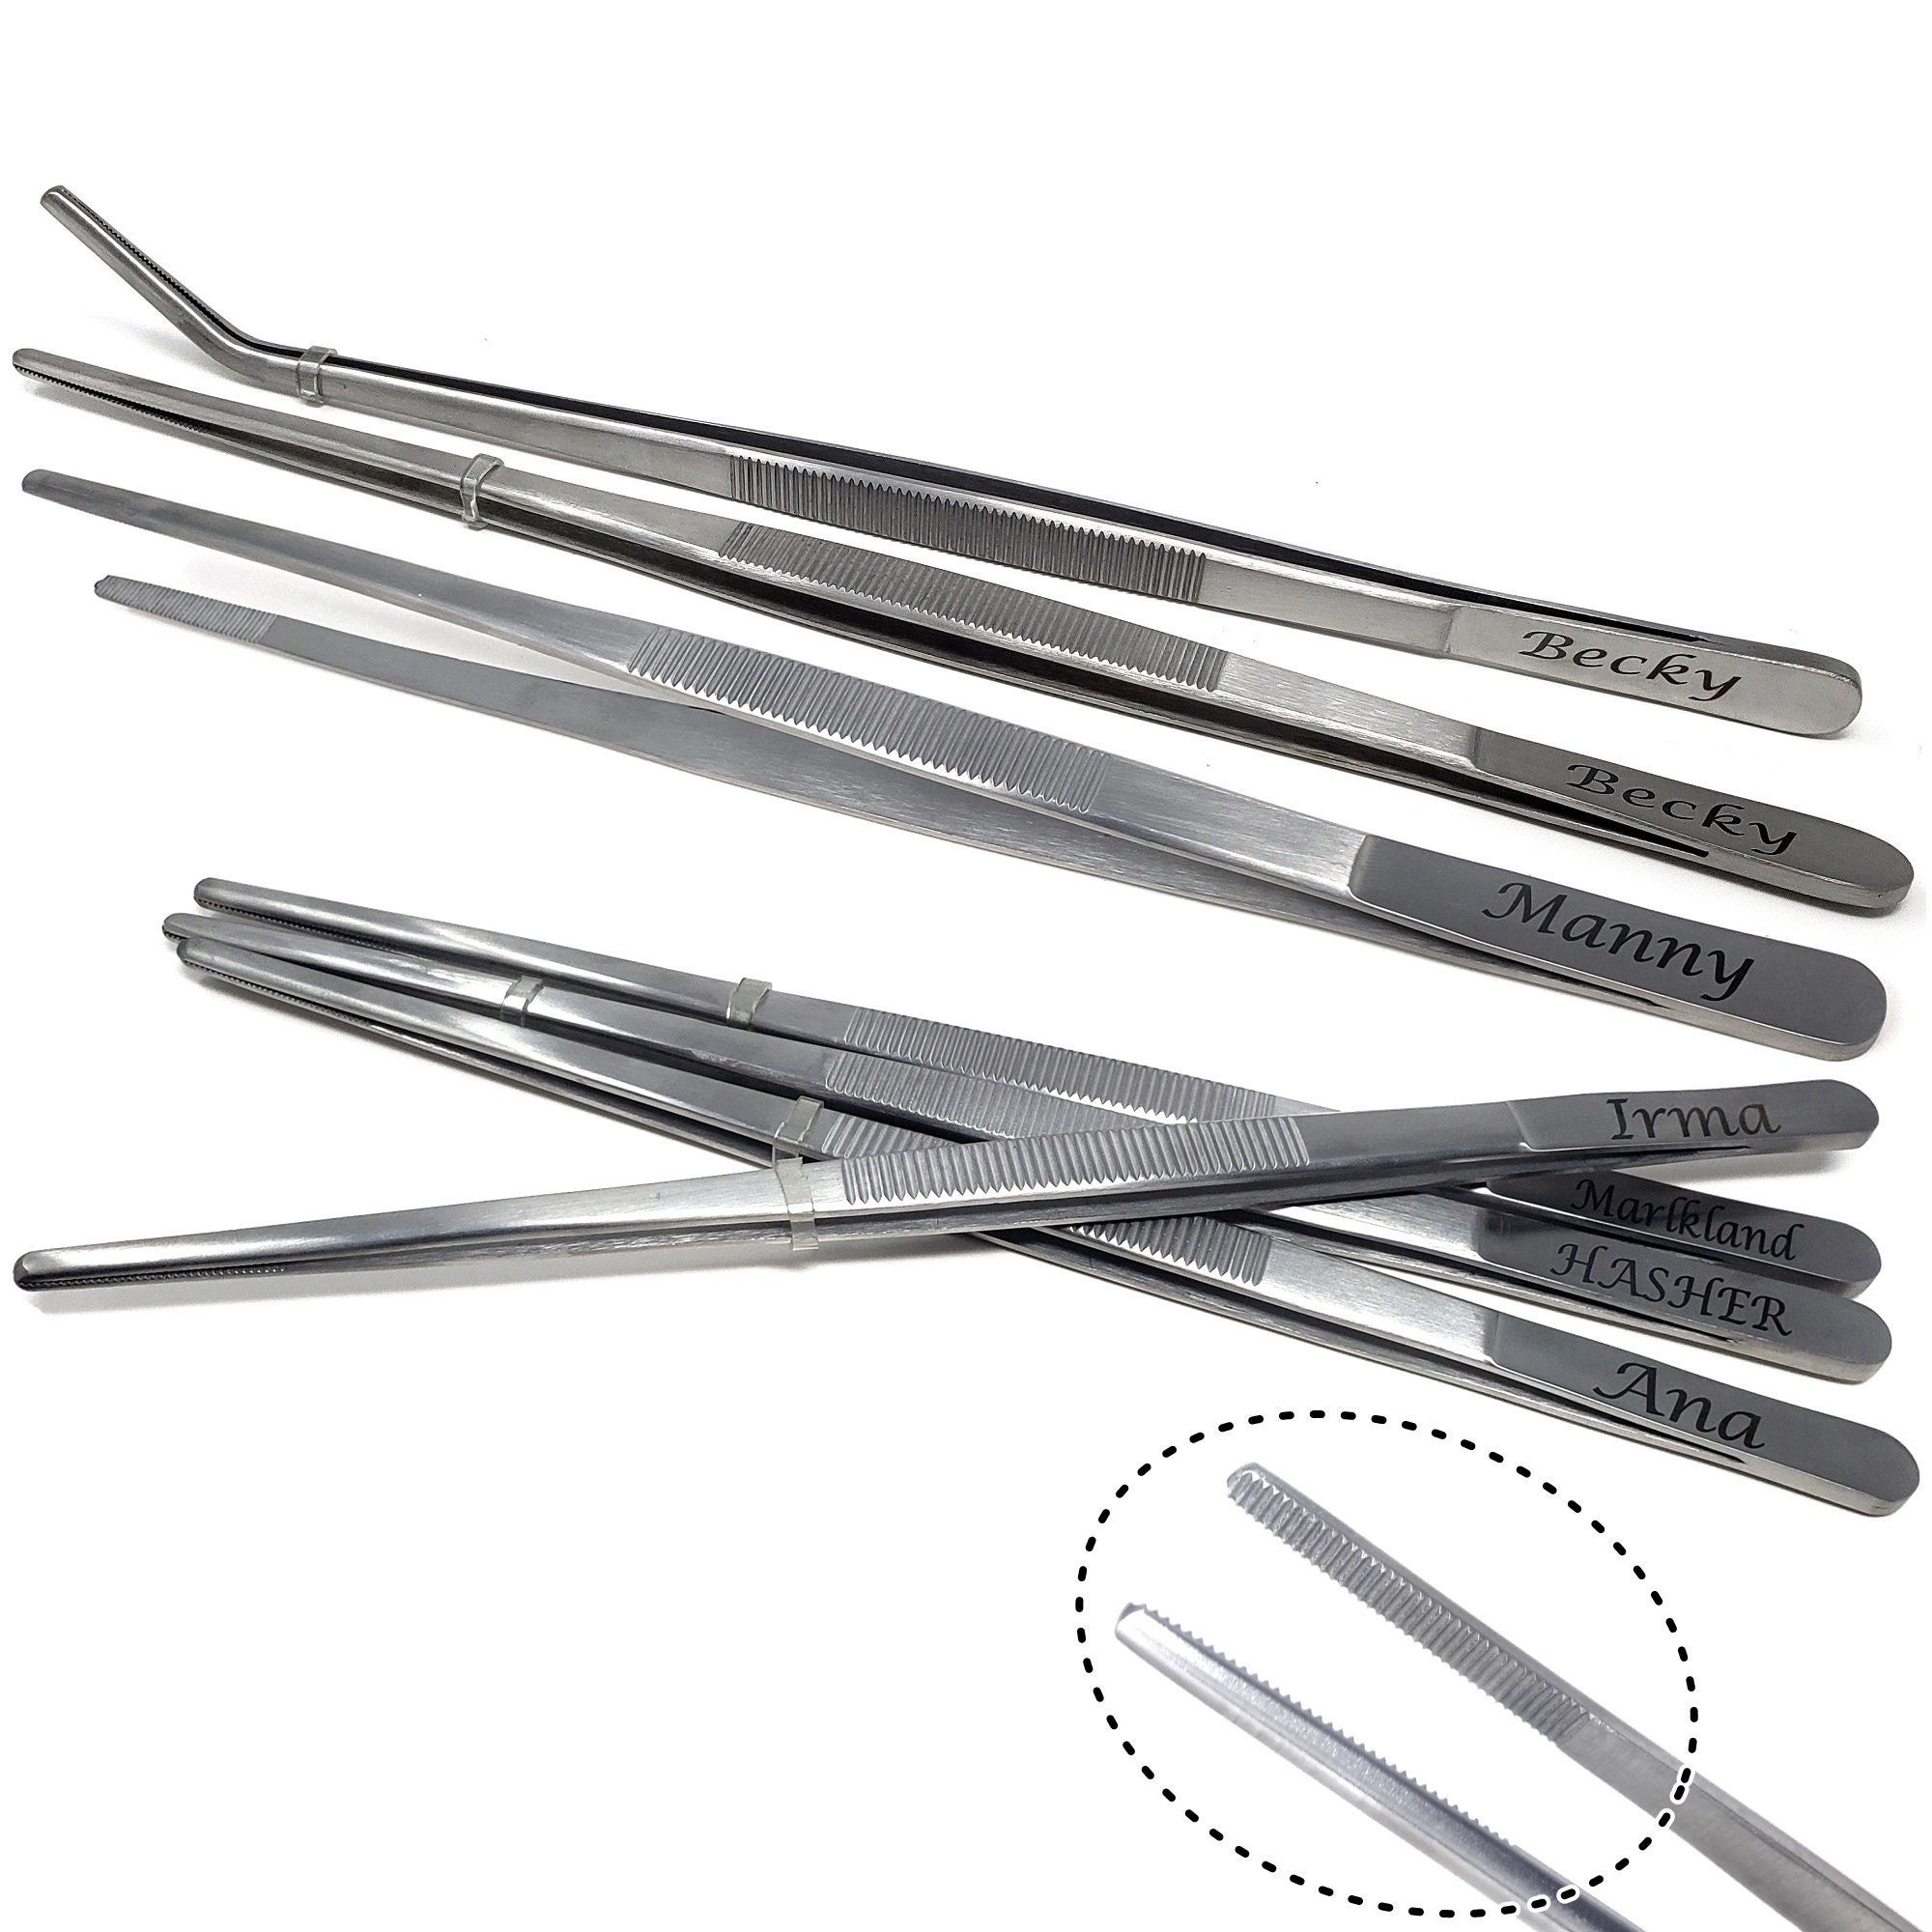 10 Stainless Steel Angled Feeding Tongs Tweezers for Reptile